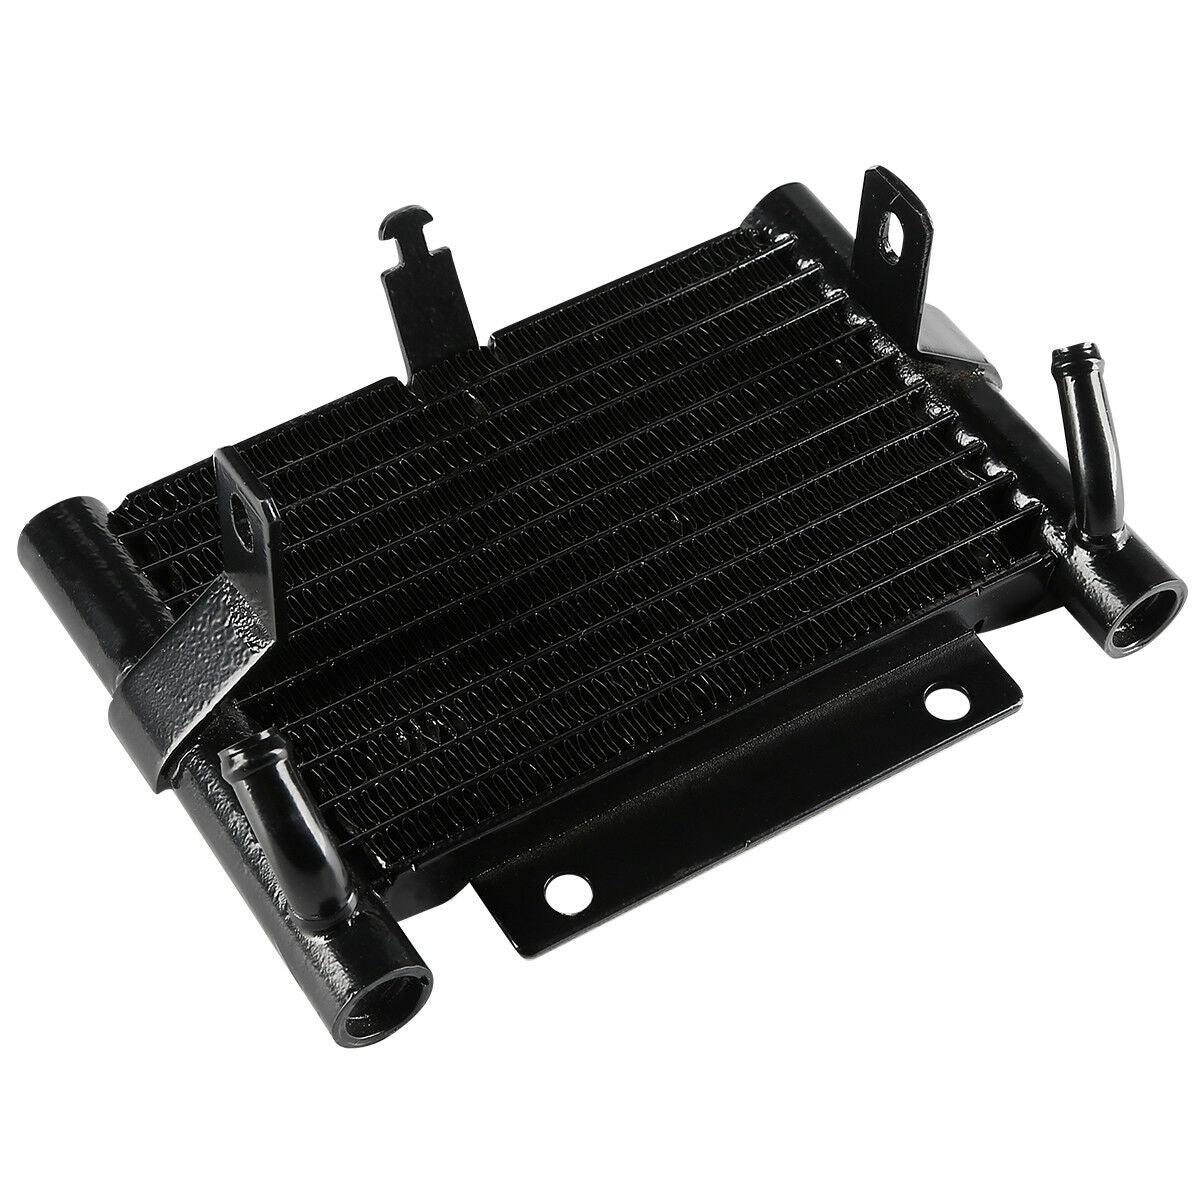 Oil Cooler Fit For Harley Touring Road King Street Electra Glide 2017-2021 Black - Moto Life Products